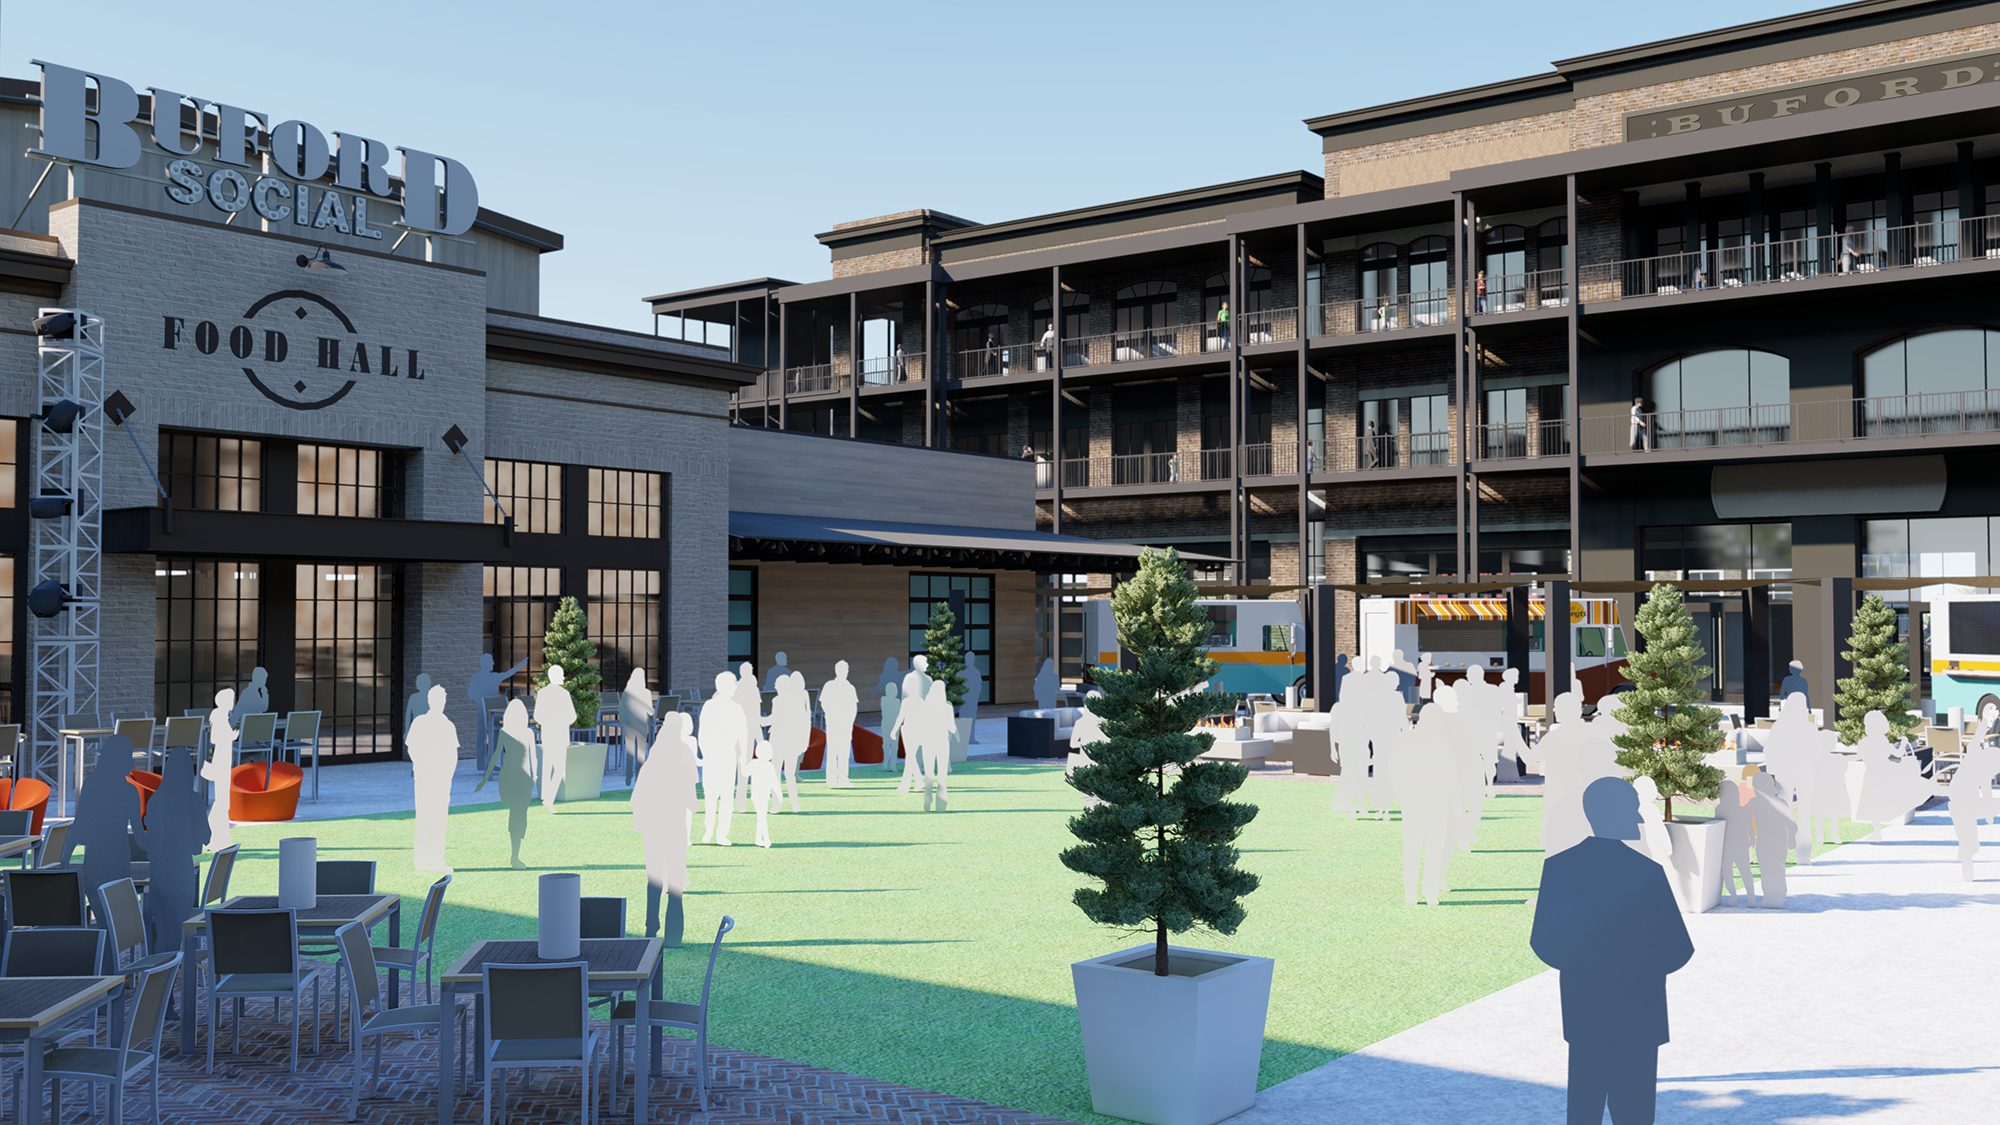 Fuqua’s plans for Jacksonville include a stage with a green space that can accommodate up to 1,000 people for events.